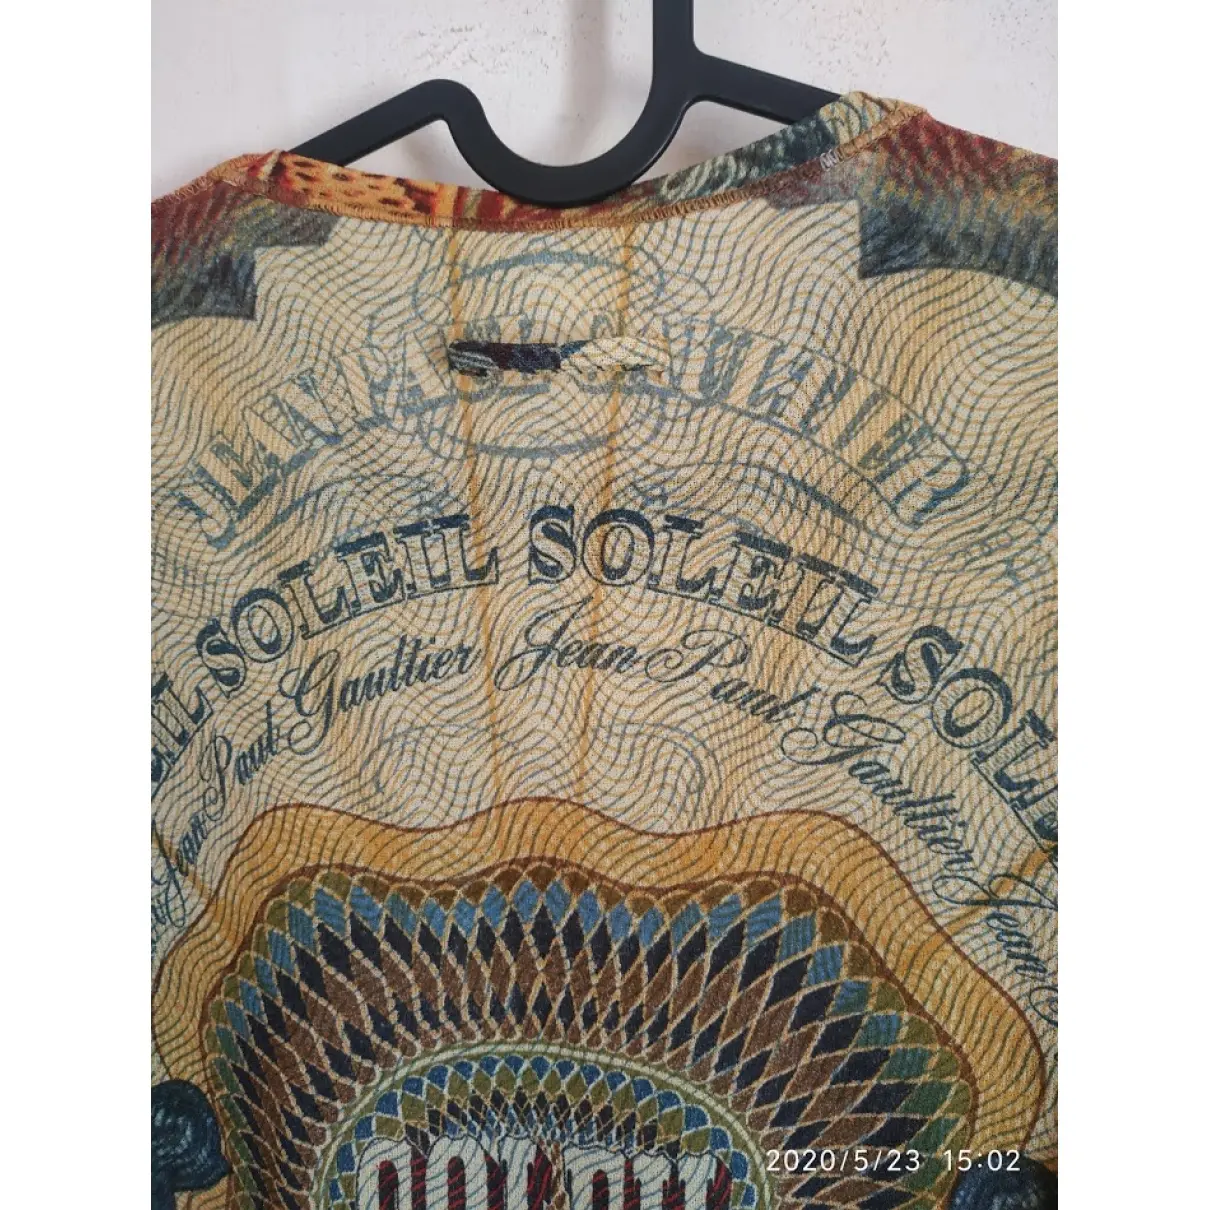 Polyester T-shirt Jean Paul Gaultier - Vintage